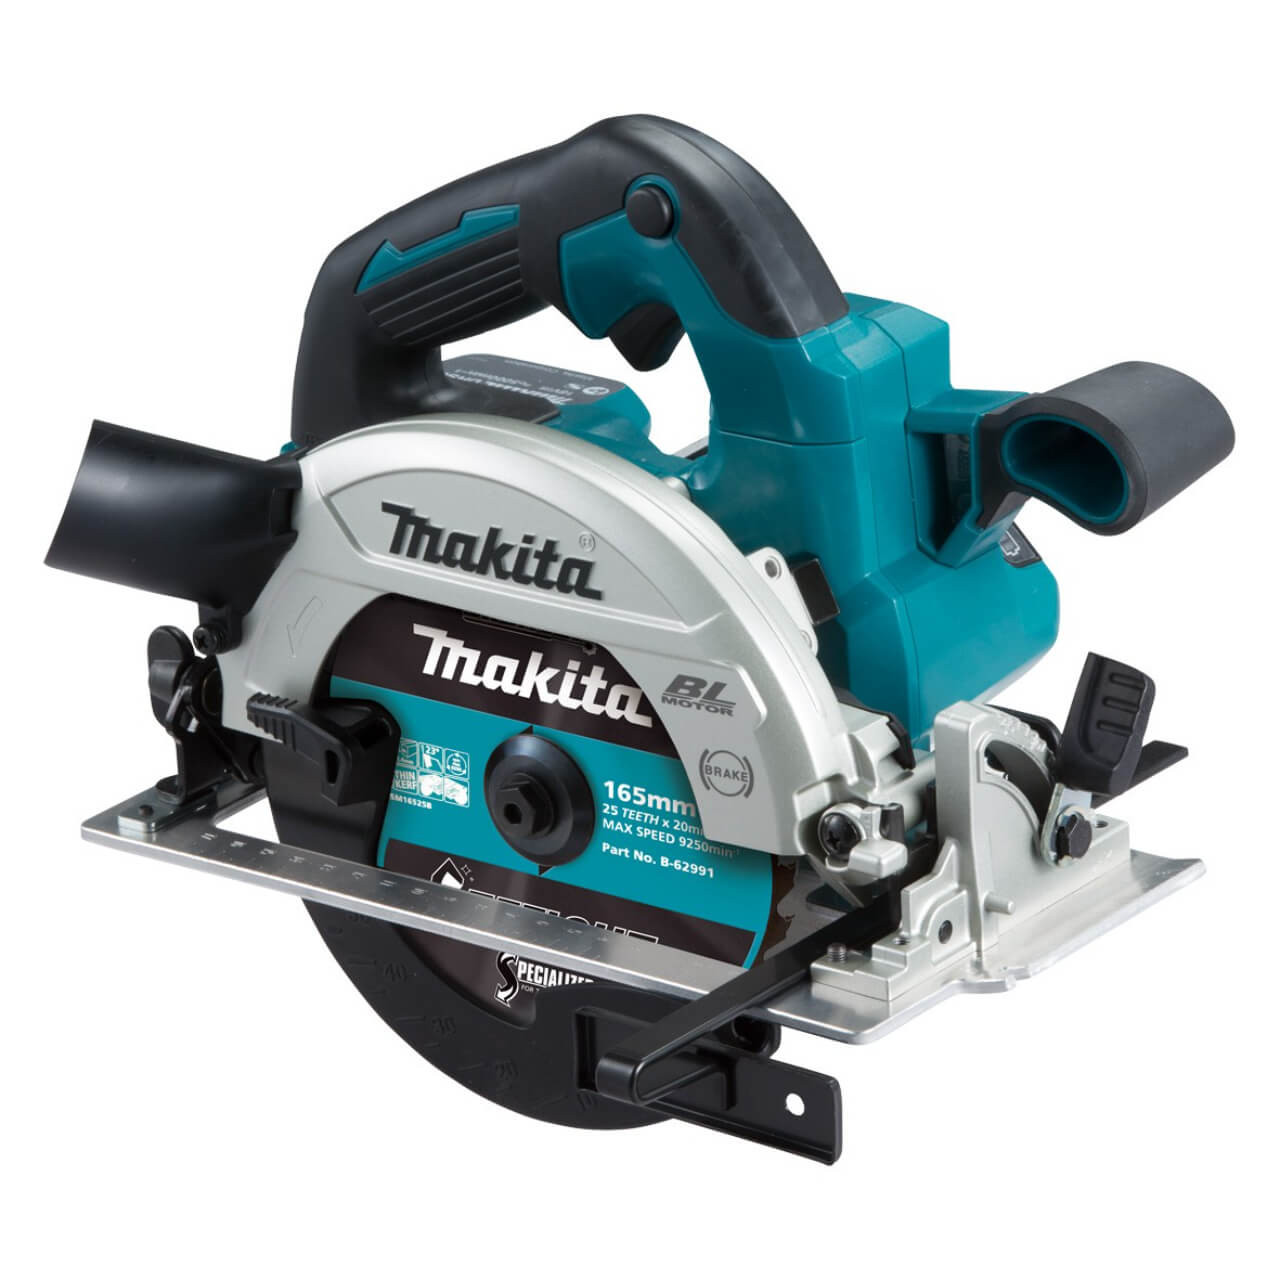 Makita 18V BRUSHLESS 165mm Circular Saw (Right hand blade) - Tool Only